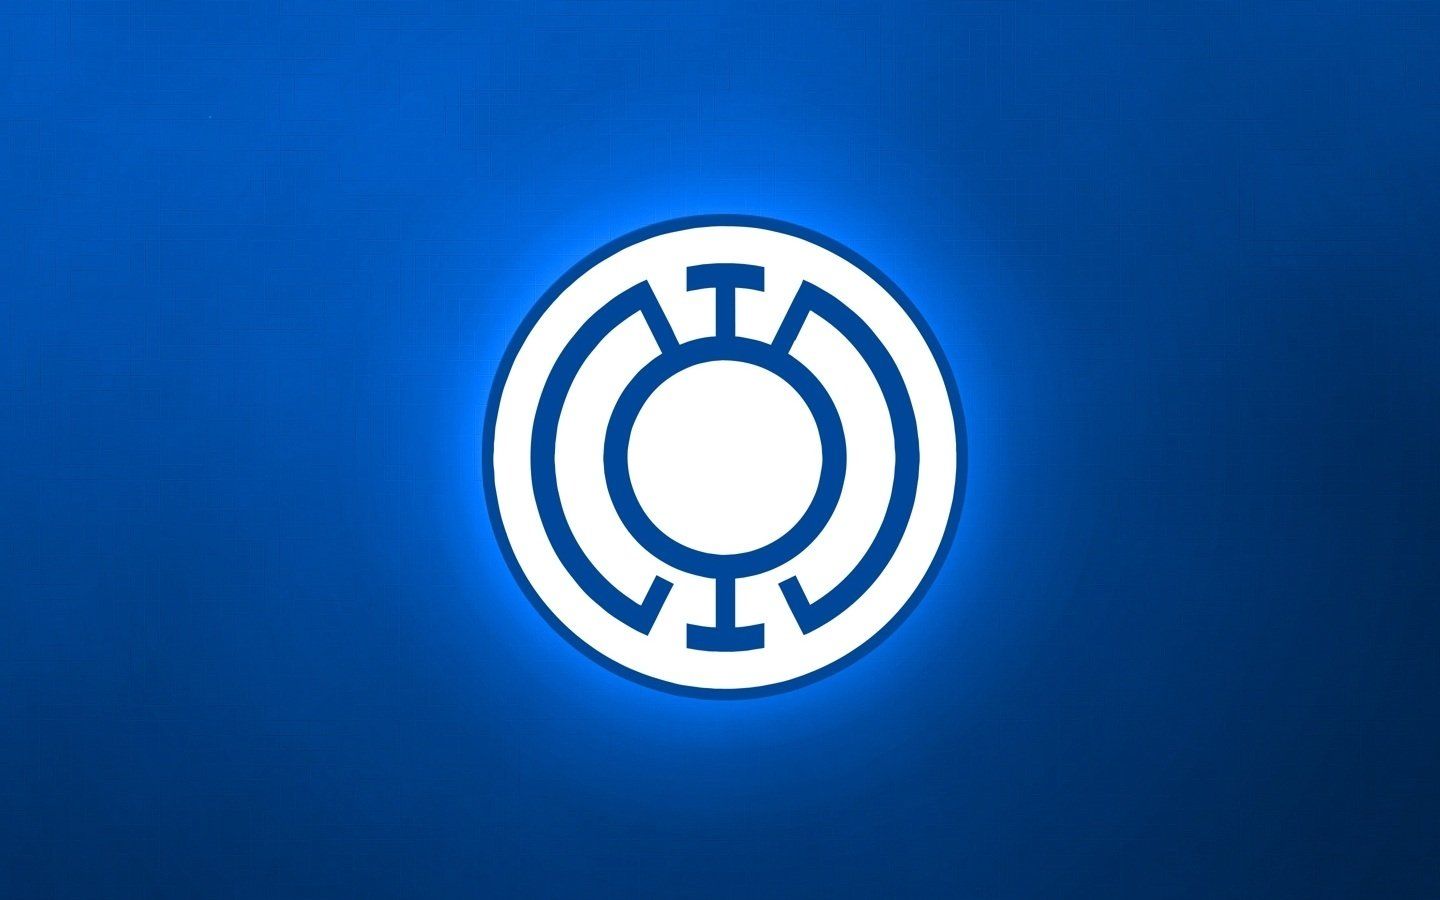 Blue Lantern Corps Wallpaper and Background Imagex900